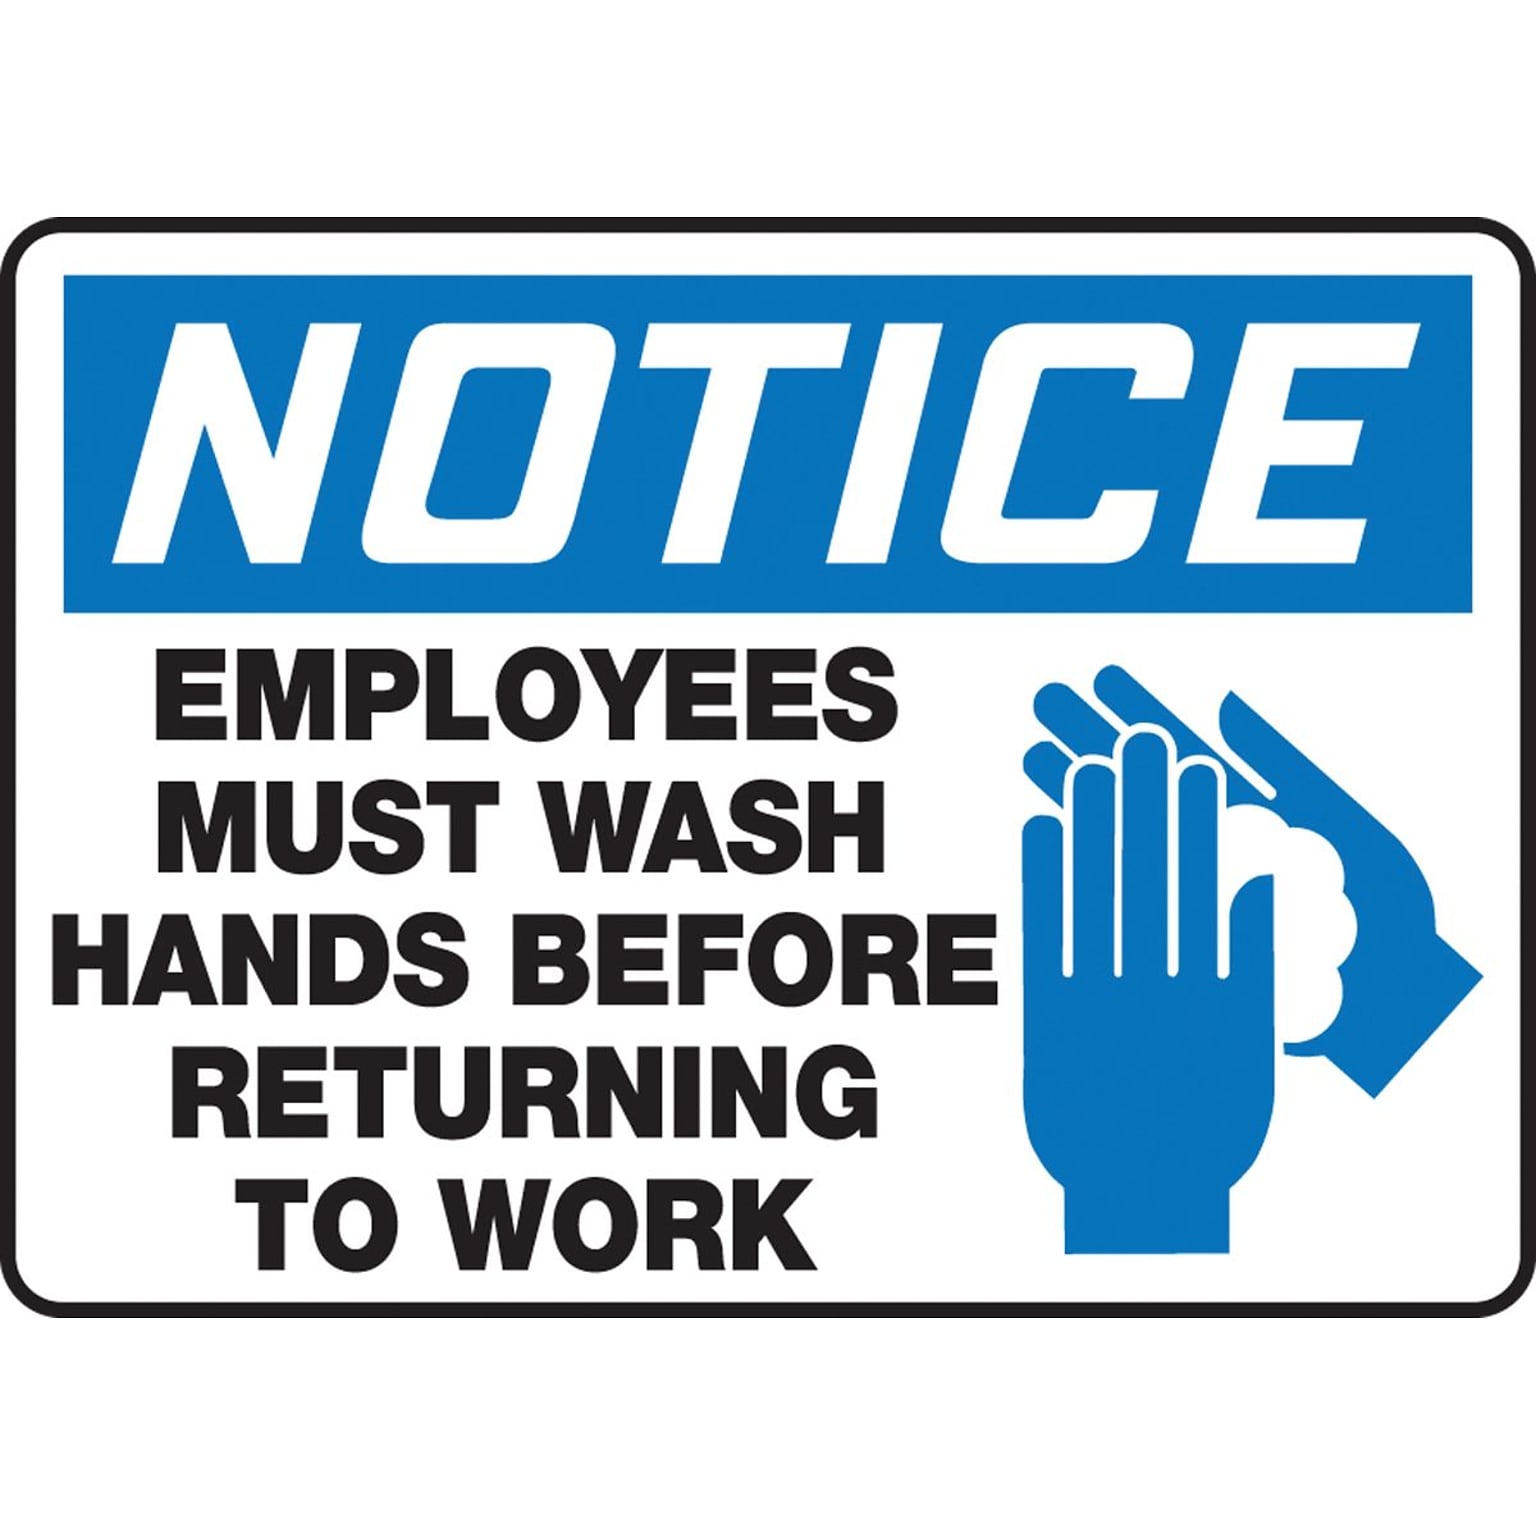 Accuform 7 x 10 Vinyl Housekeeping Sign NOTICE EMPLOYEES MUST WASH.., Blue/Black On White (MRST811VS)